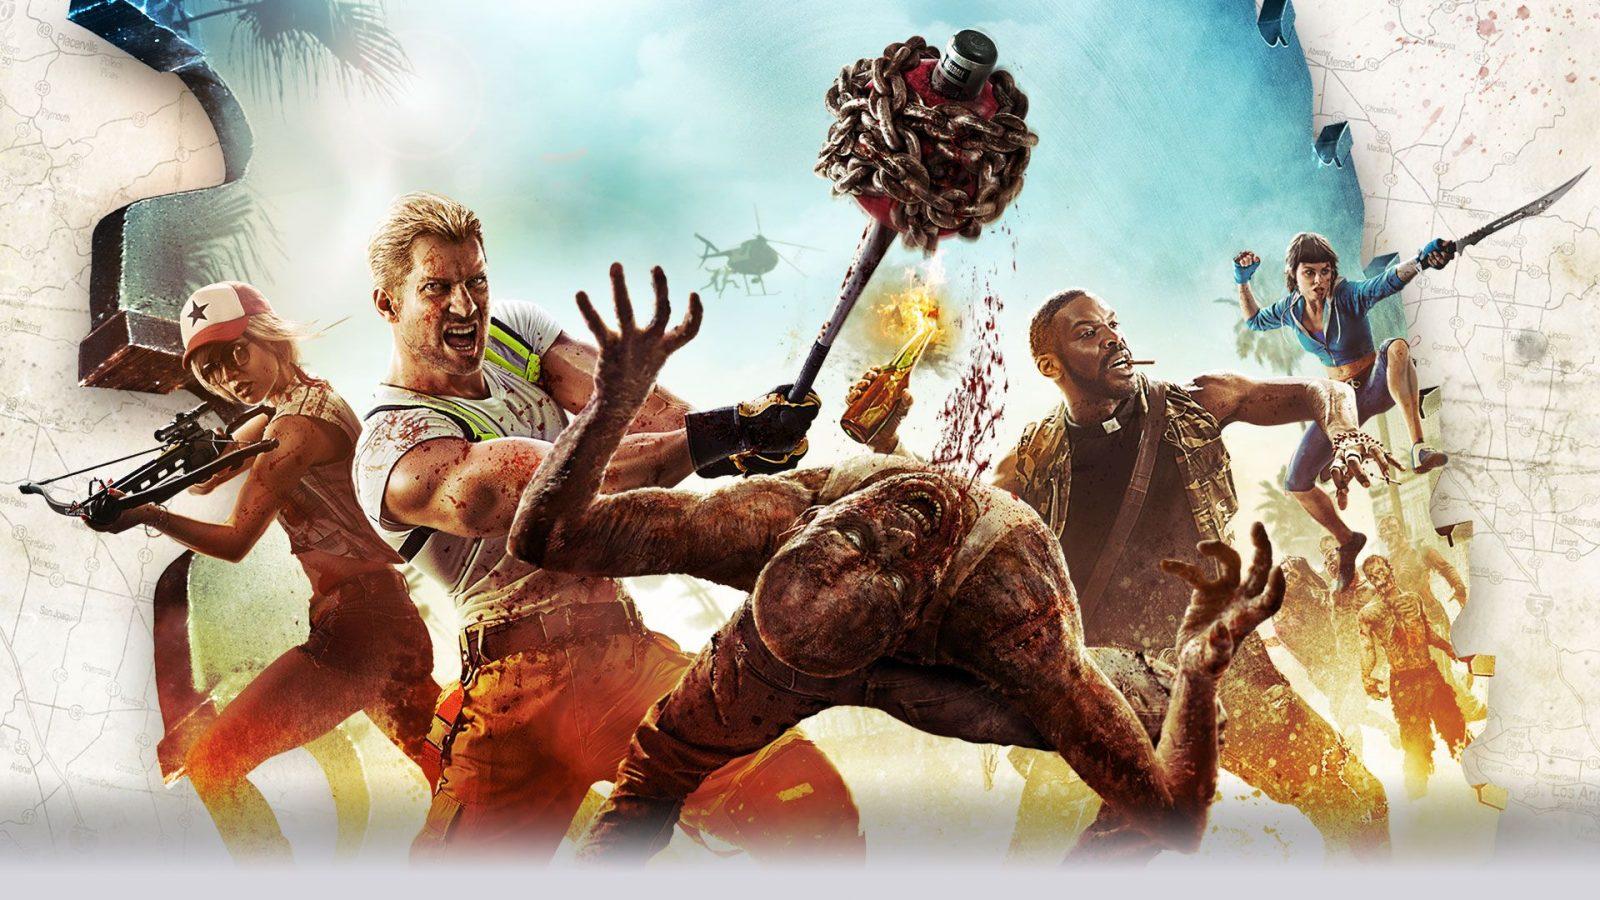 Co-Optimus - Review - Dead Island 2 Co-op Review